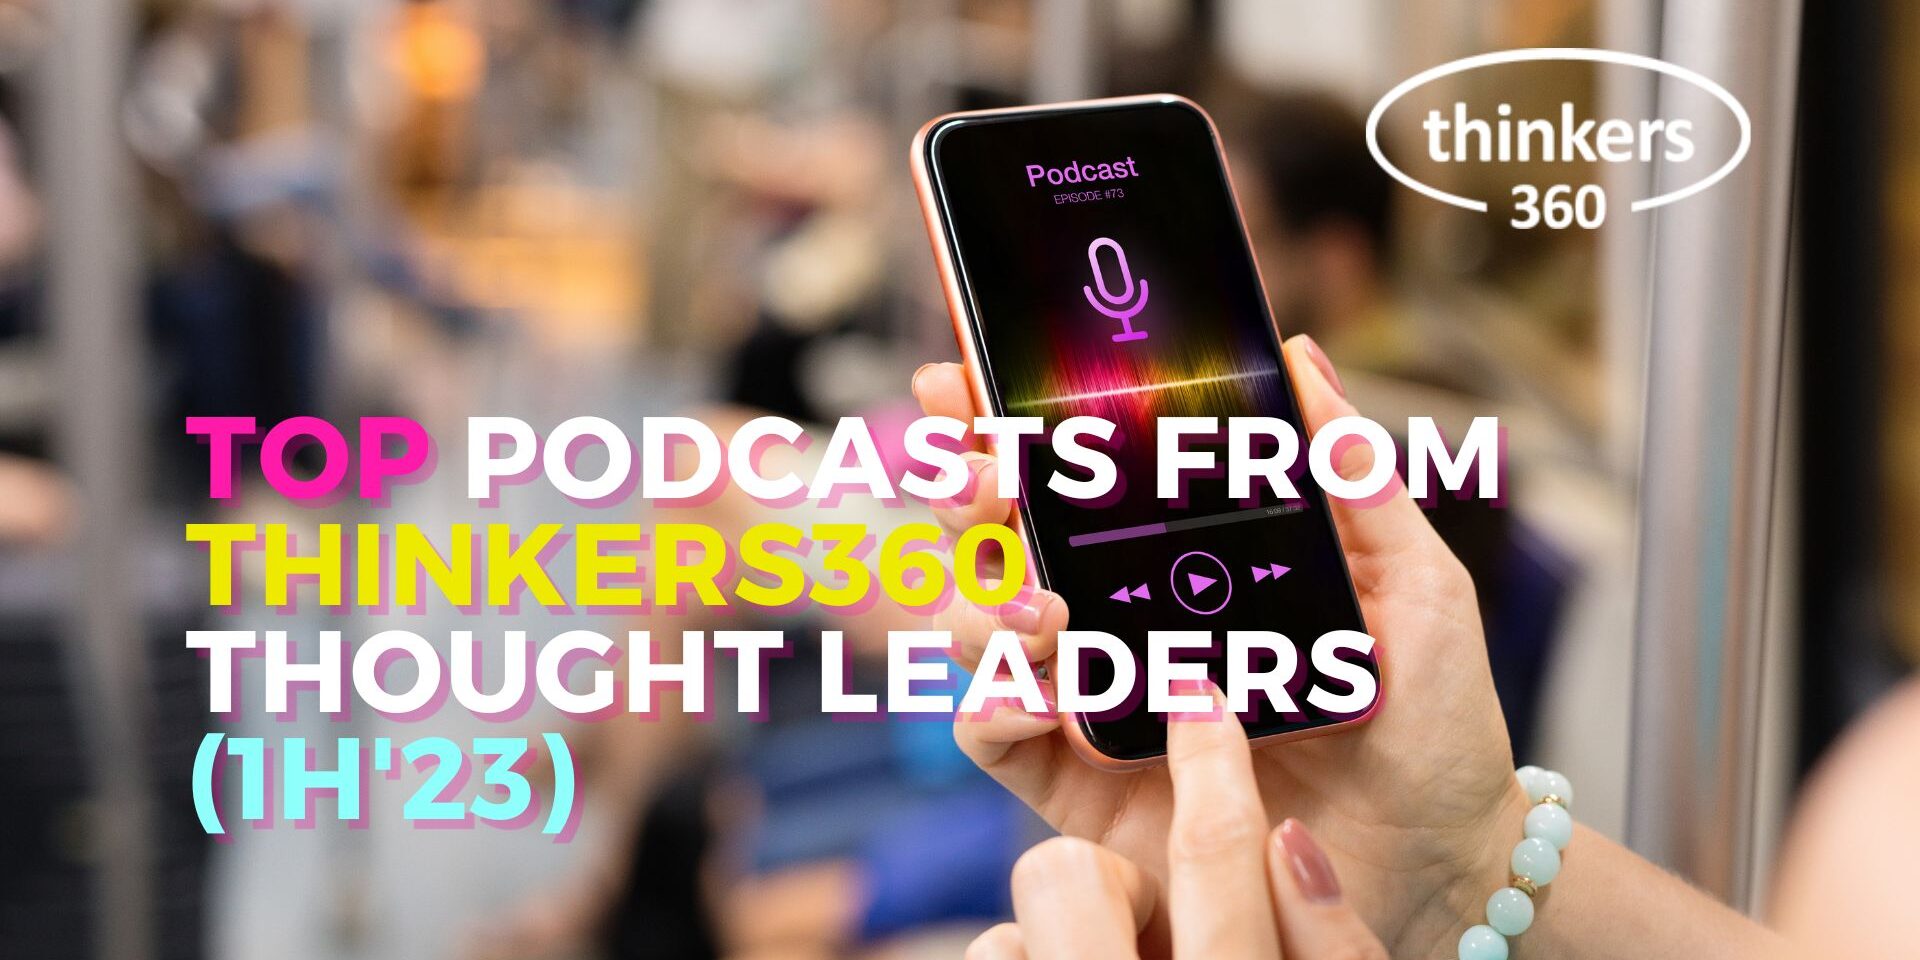 Top Podcasts from Thinkers360 Thought Leaders (1H’23)